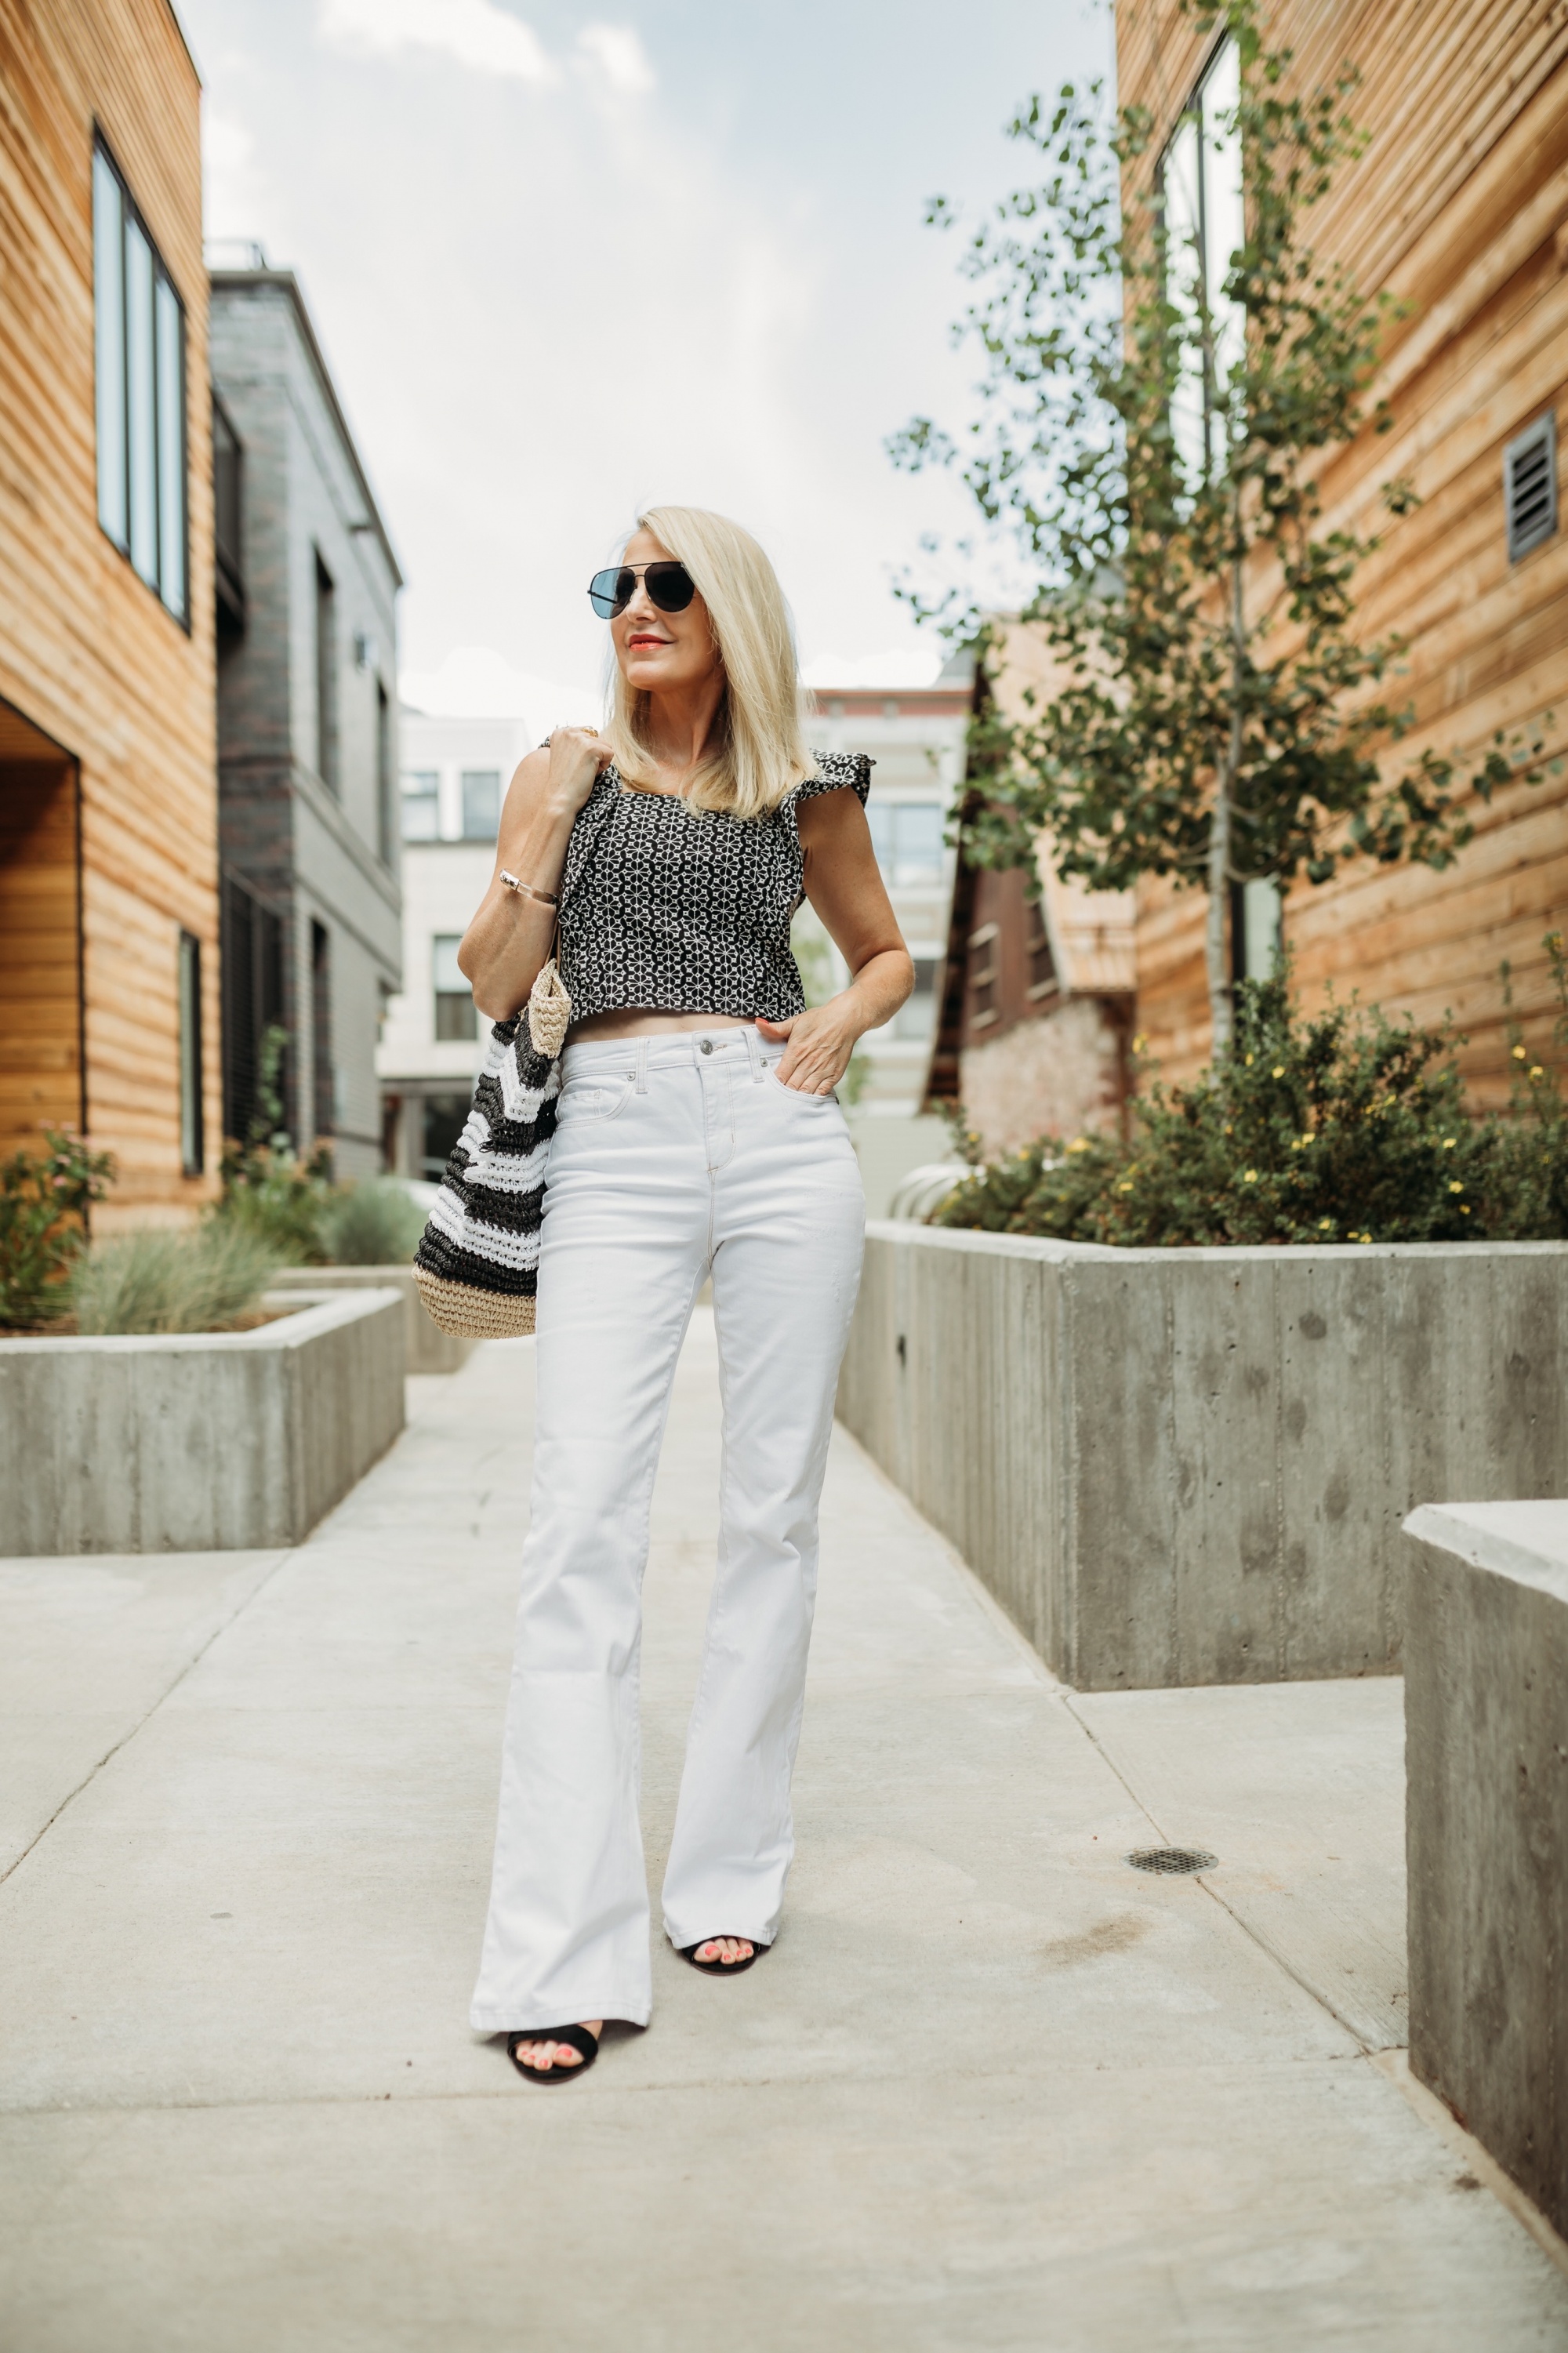 How to Make Legs Look Longer, Fashion blogger Erin Busbee of Busbee Style wearing white flared jeans, printed ruffle sleeve top, black strappy block heel sandals, and striped tote bag by Scoop from Walmart in Telluride, Colorado